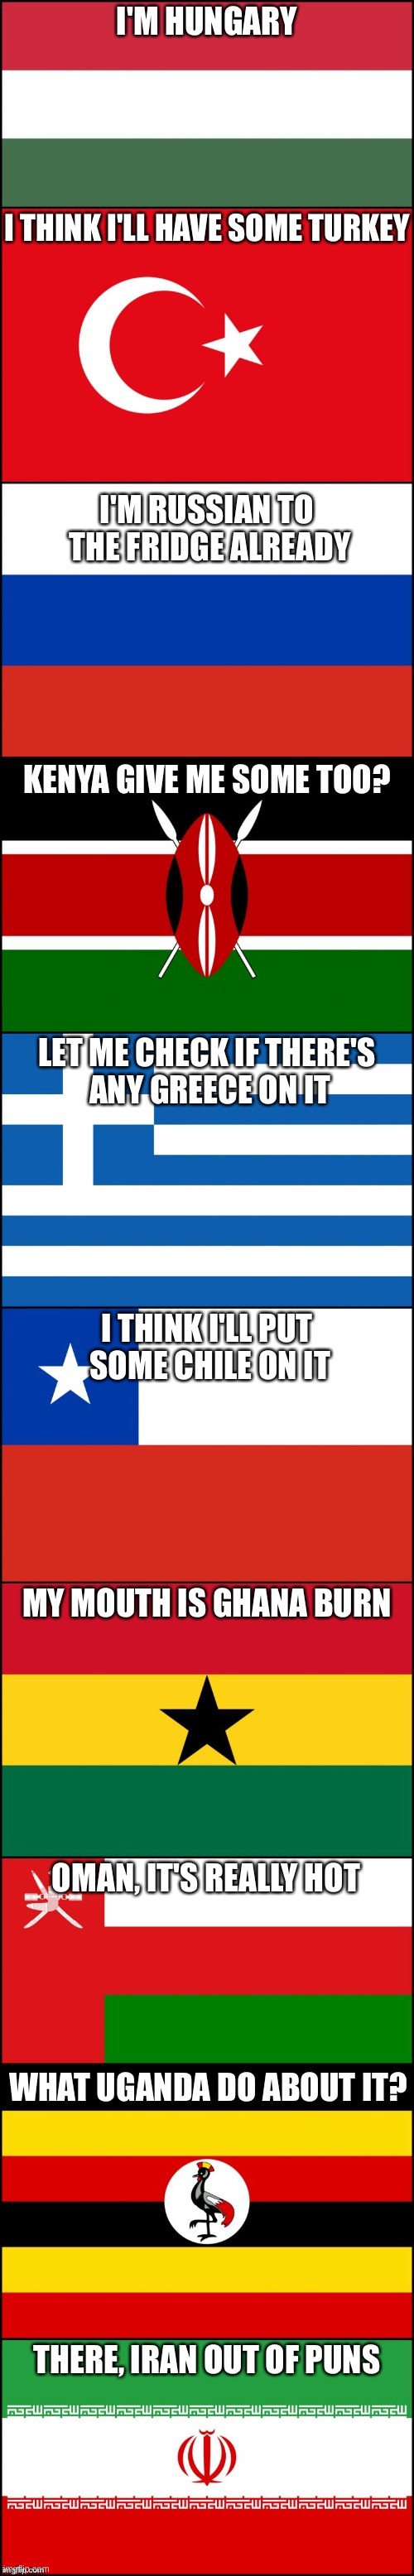 lol i did this with my social studies teacher | I'M HUNGARY THERE, IRAN OUT OF PUNS I THINK I'LL HAVE SOME TURKEY I'M RUSSIAN TO THE FRIDGE ALREADY KENYA GIVE ME SOME TOO? LET ME CHECK IF THERE'S ANY GREECE ON IT I THINK I'LL PUT SOME CHILE ON IT MY MOUTH IS GHANA BURN OMAN, ITS REALLY HOT WHAT YOU GONNA UGANDA DO ABOUT IT? THERE, IRAN OUT OF PUNS | image tagged in lol,memes,oh wow are you actually reading these tags,get rickrolled,then get stickbugged | made w/ Imgflip meme maker